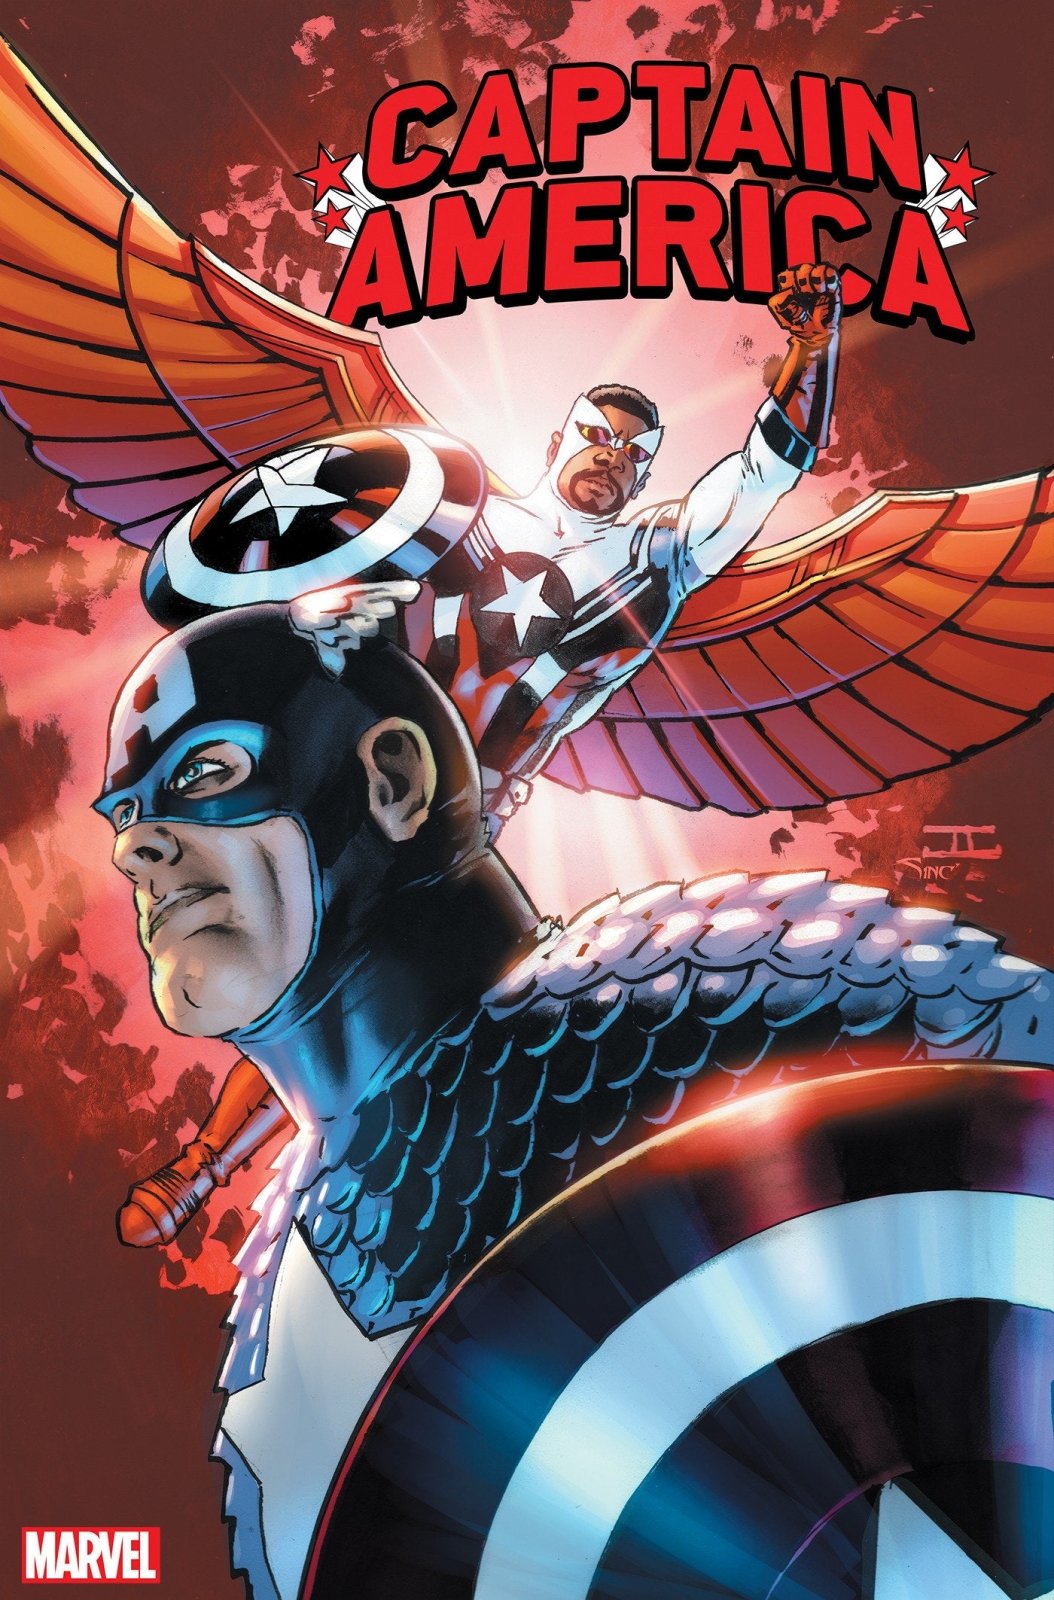 Captain America 750 John Cassaday Red Variant - The Fourth Place